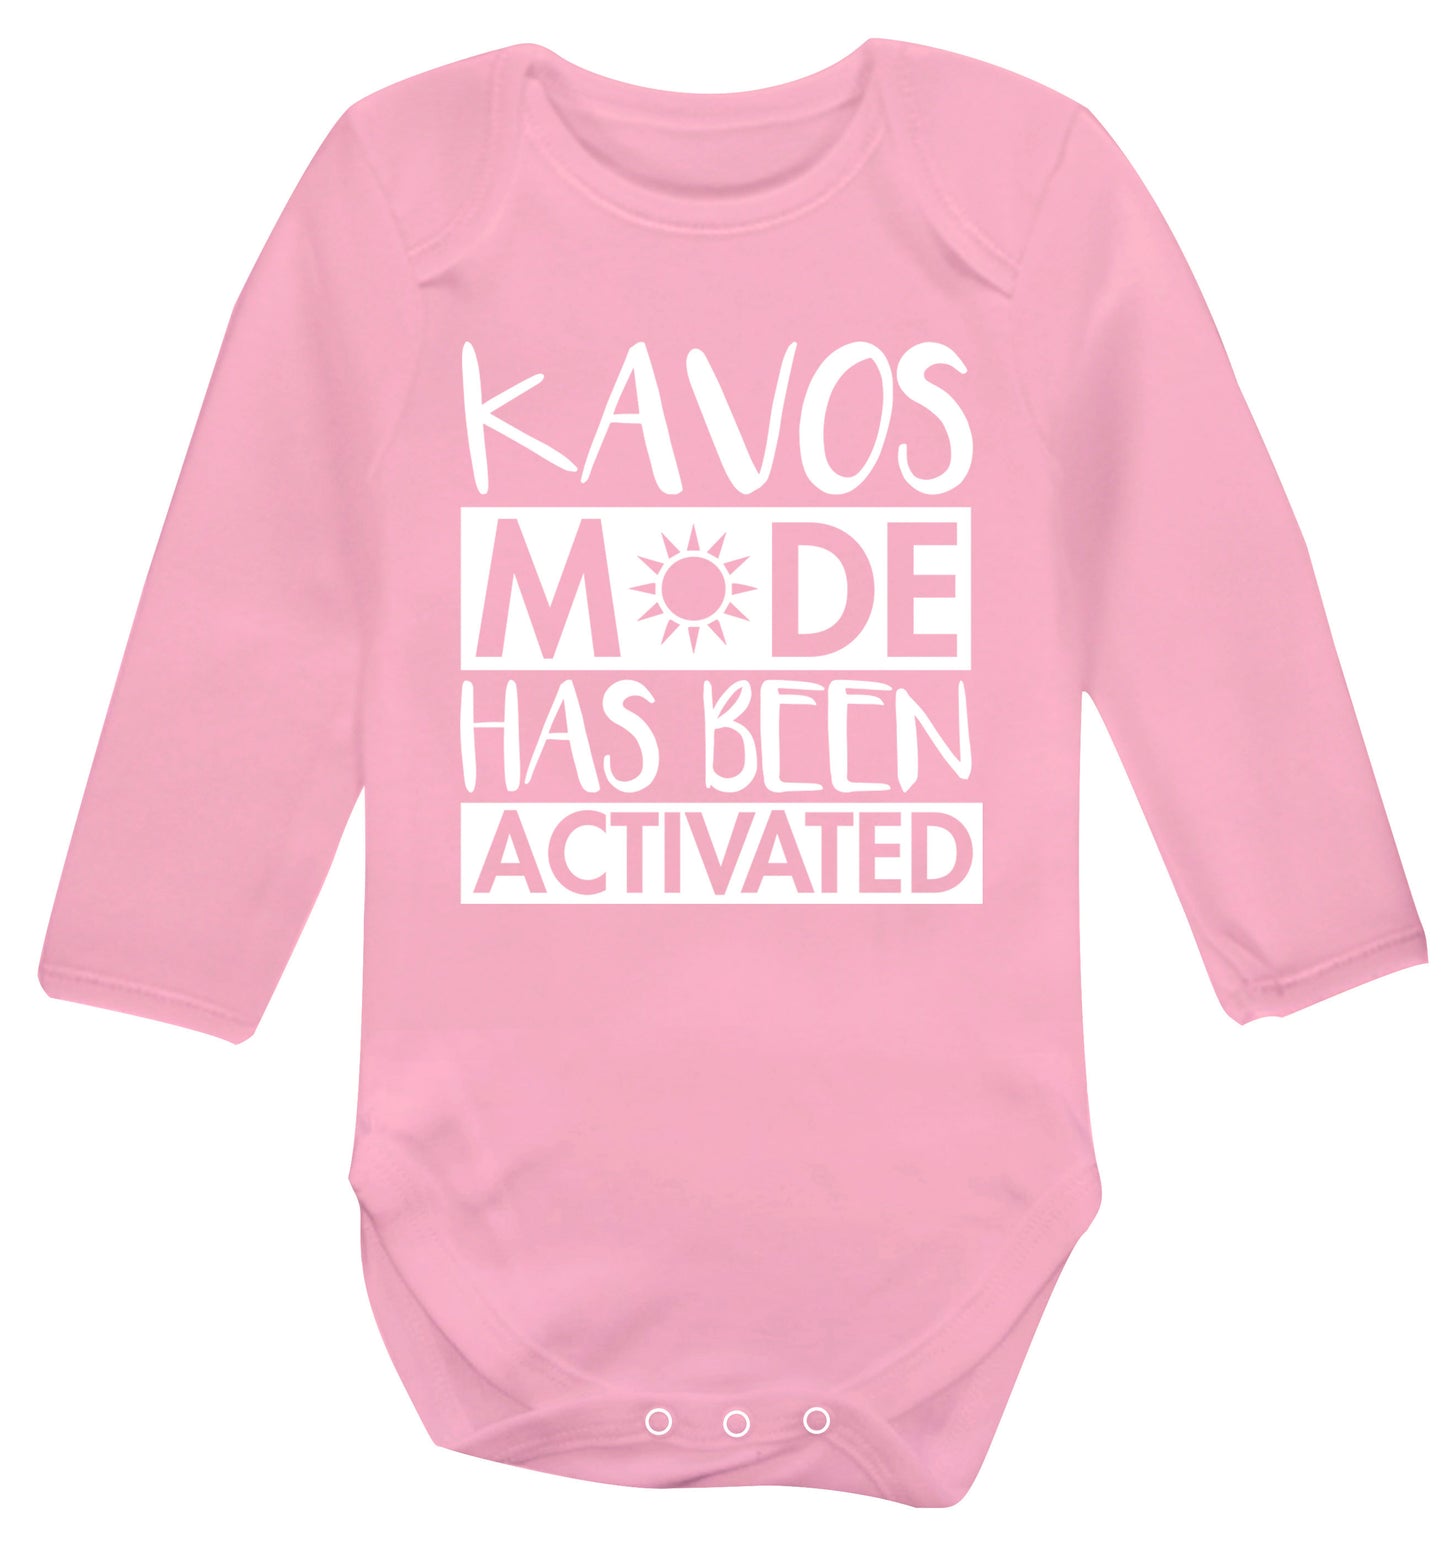 Kavos mode has been activated Baby Vest long sleeved pale pink 6-12 months